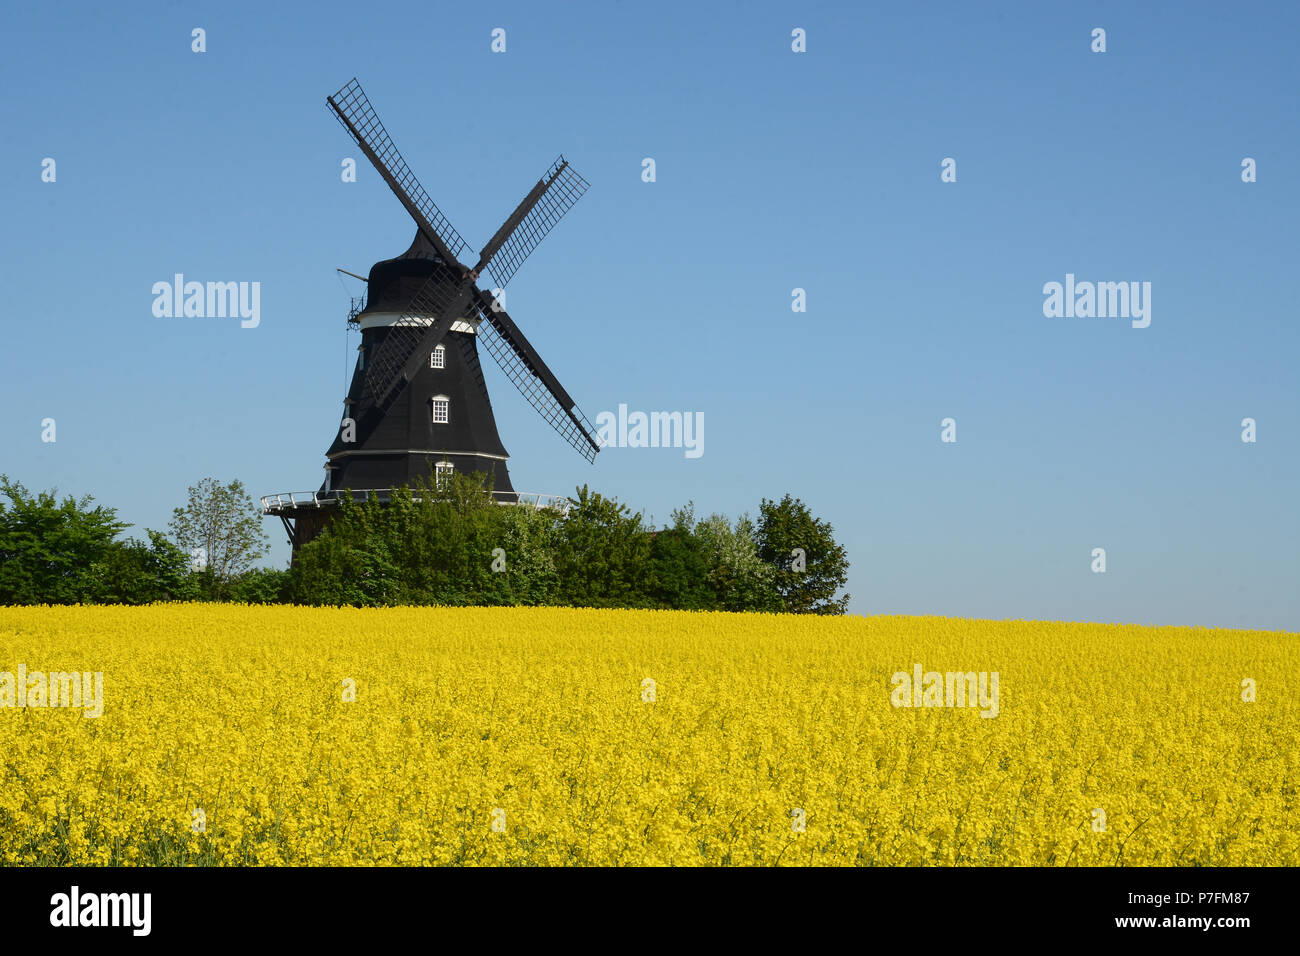 Windmill at rape field at Krageholm, Scania, Sweden Stock Photo